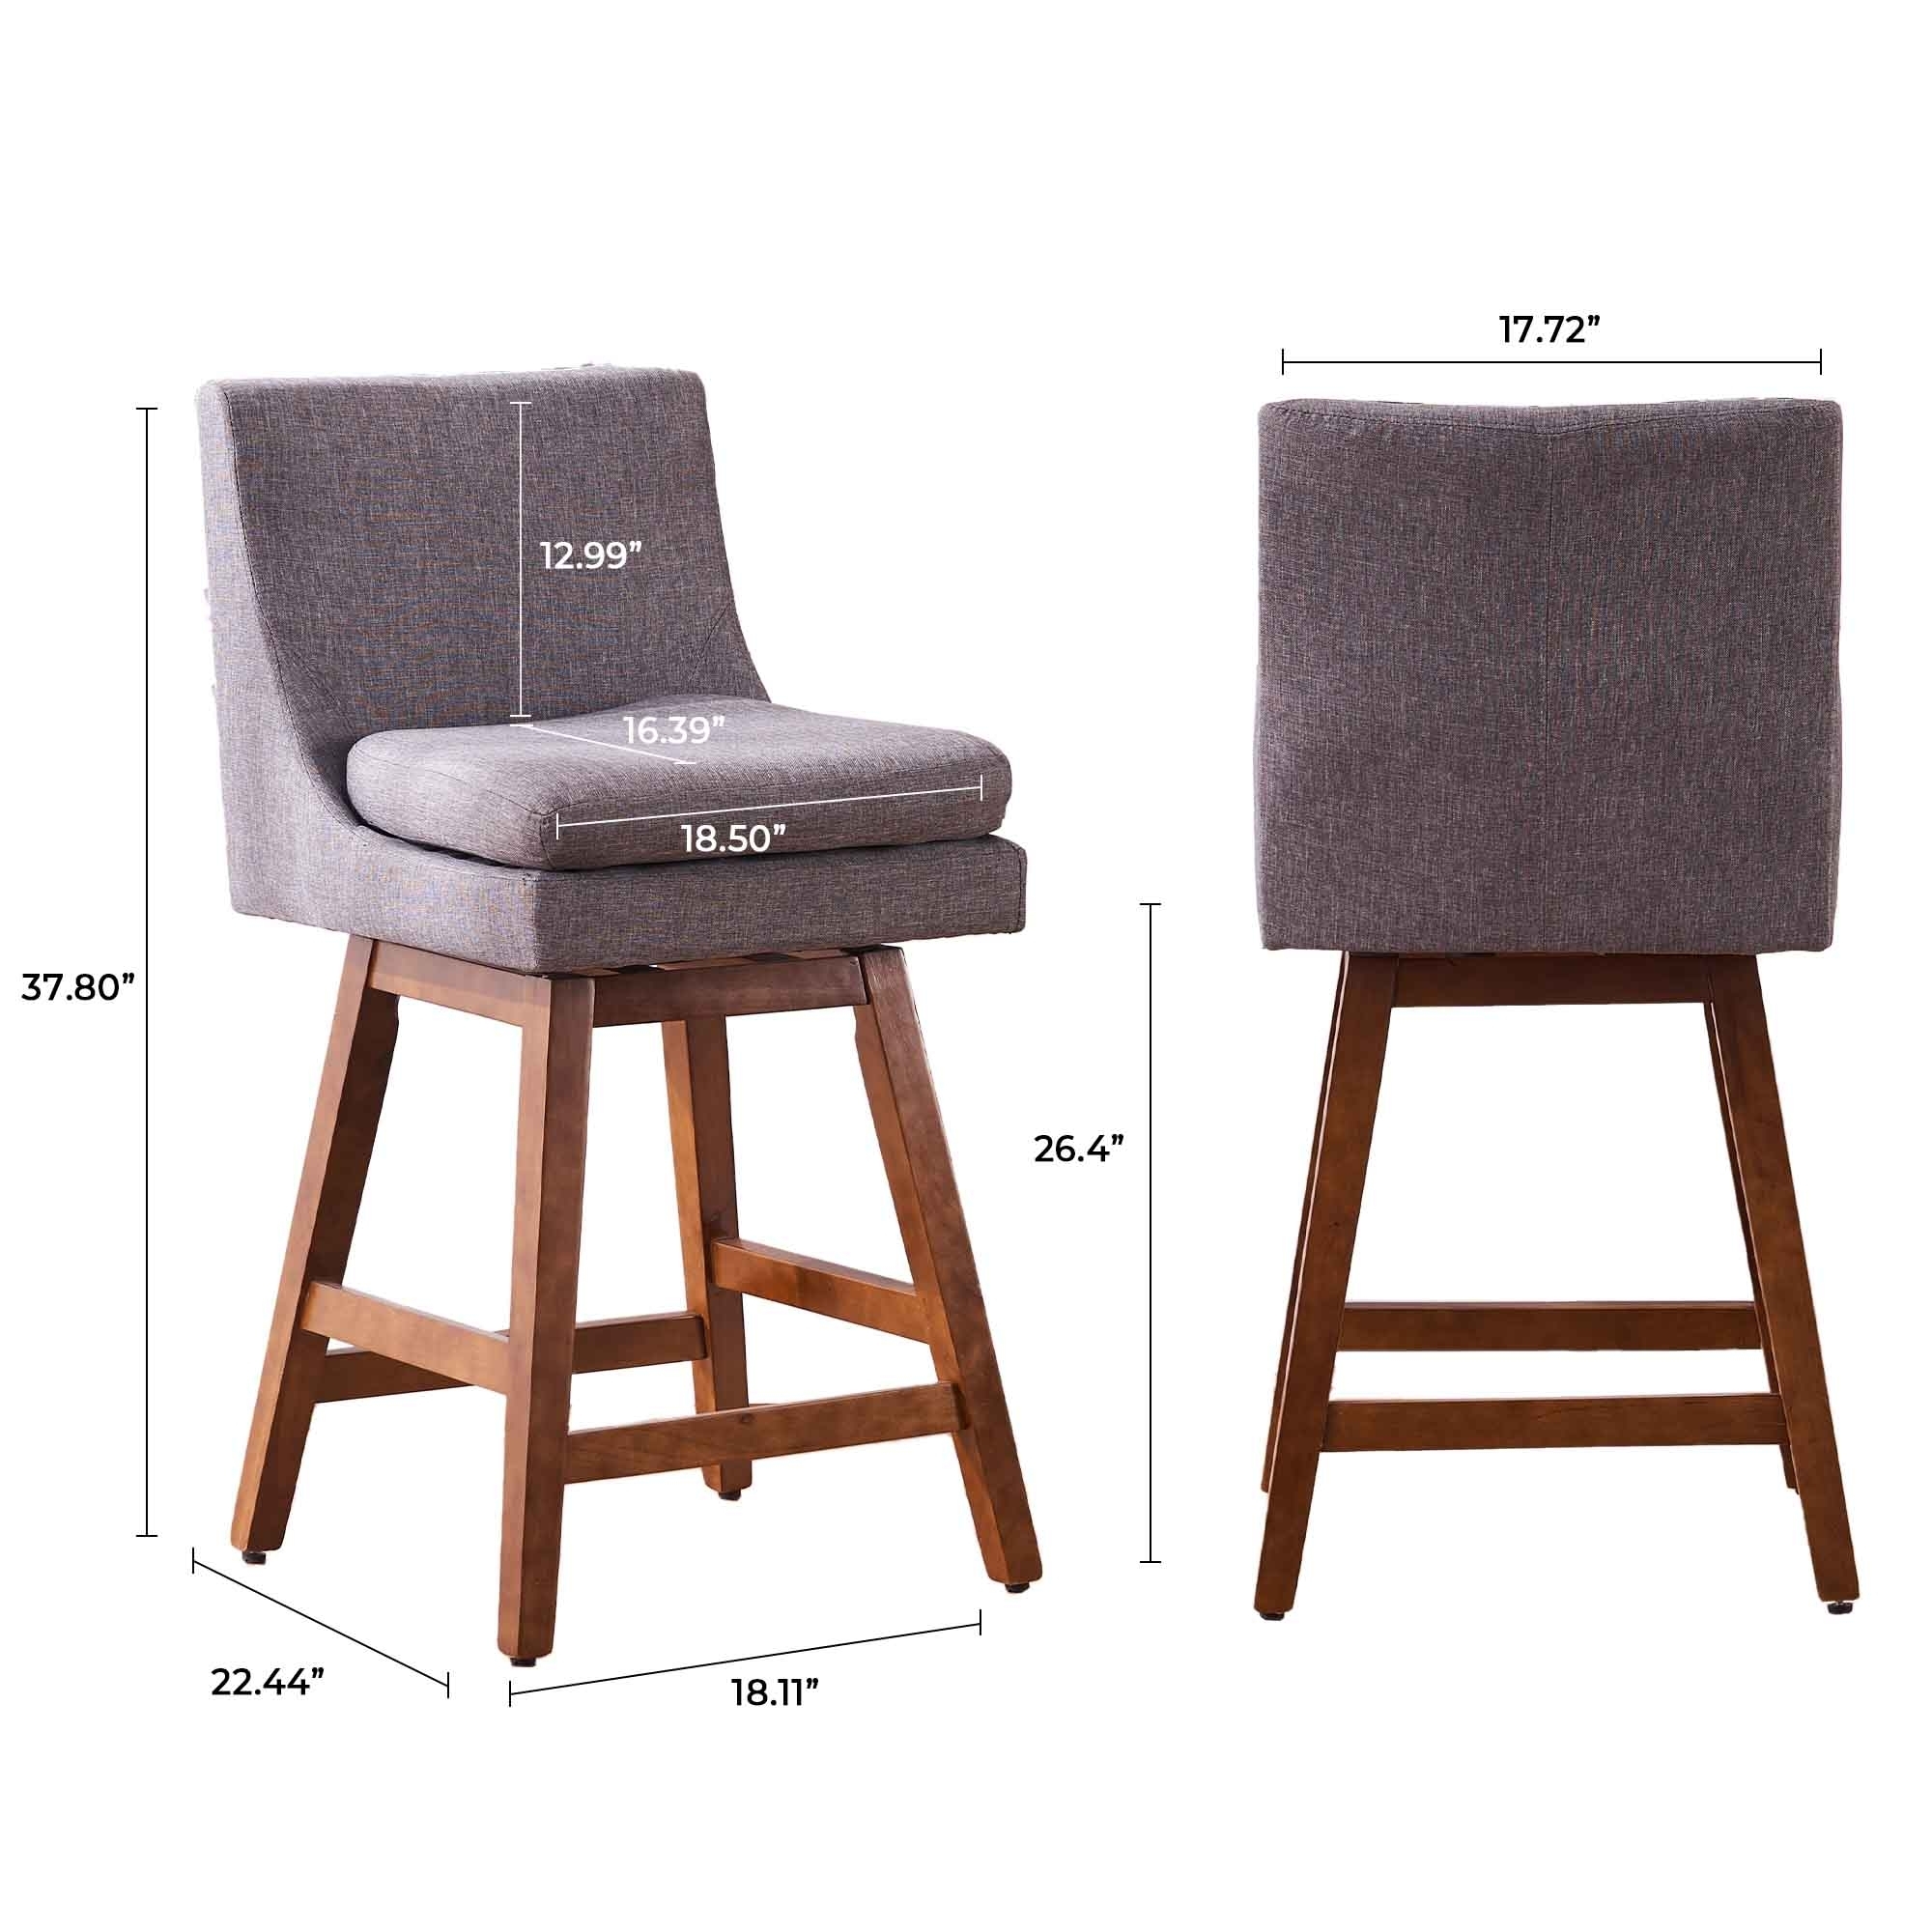 26 Swivel Counter Height Bar Stools Set Of 2, Bar Stool With High Back, Modern Upholstered Island Stools, Light Gray